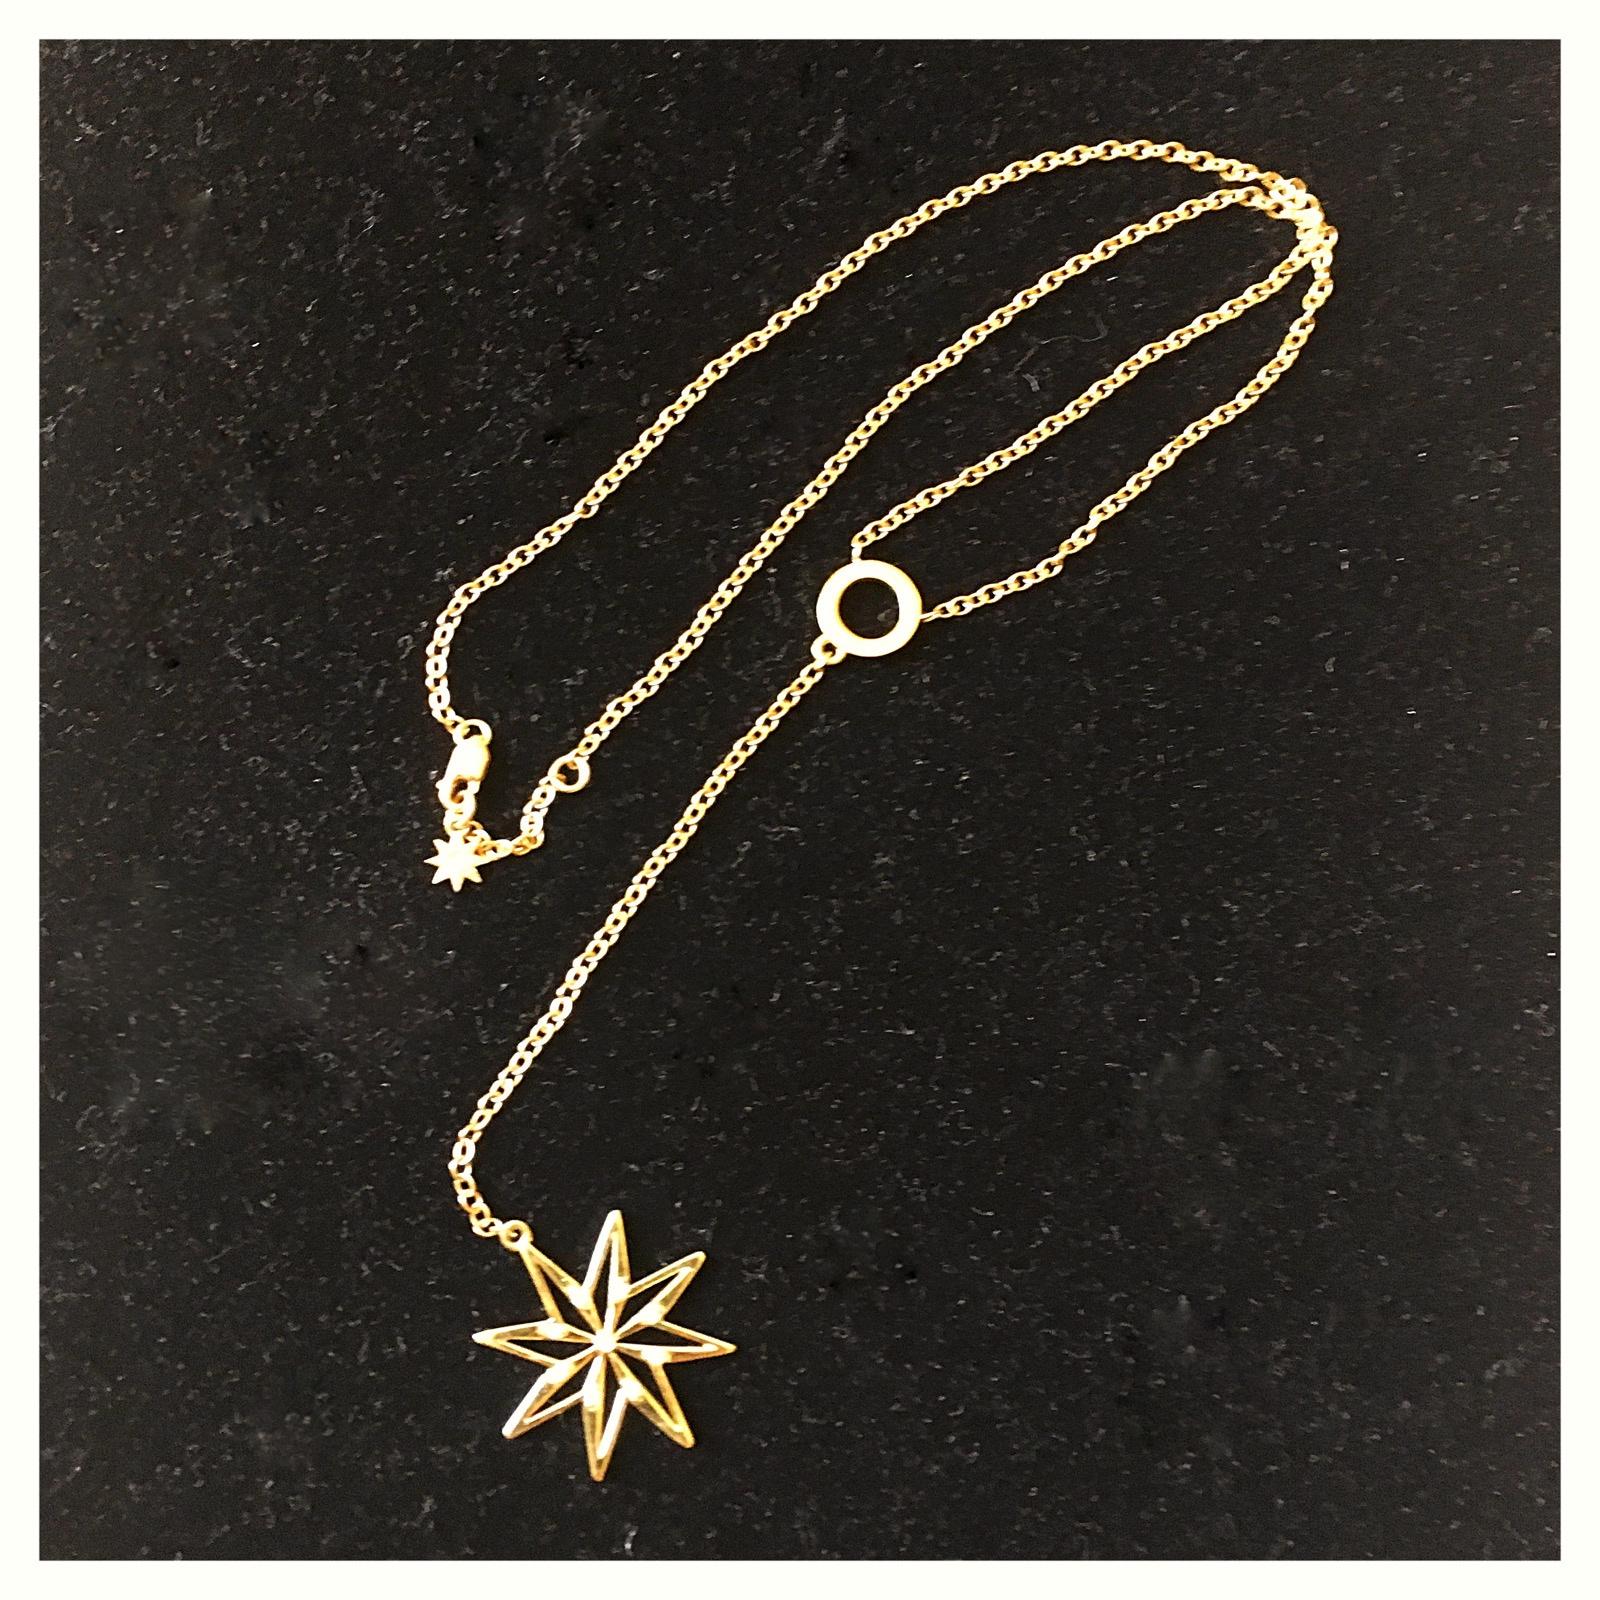 Fashionable yet timeless, this celestial lariat features our Logo Star sprinkled with diamonds dropping from a chain that extends from a chunky circle of gold.  This statement piece can be dressy or equally fashionable with a simple t